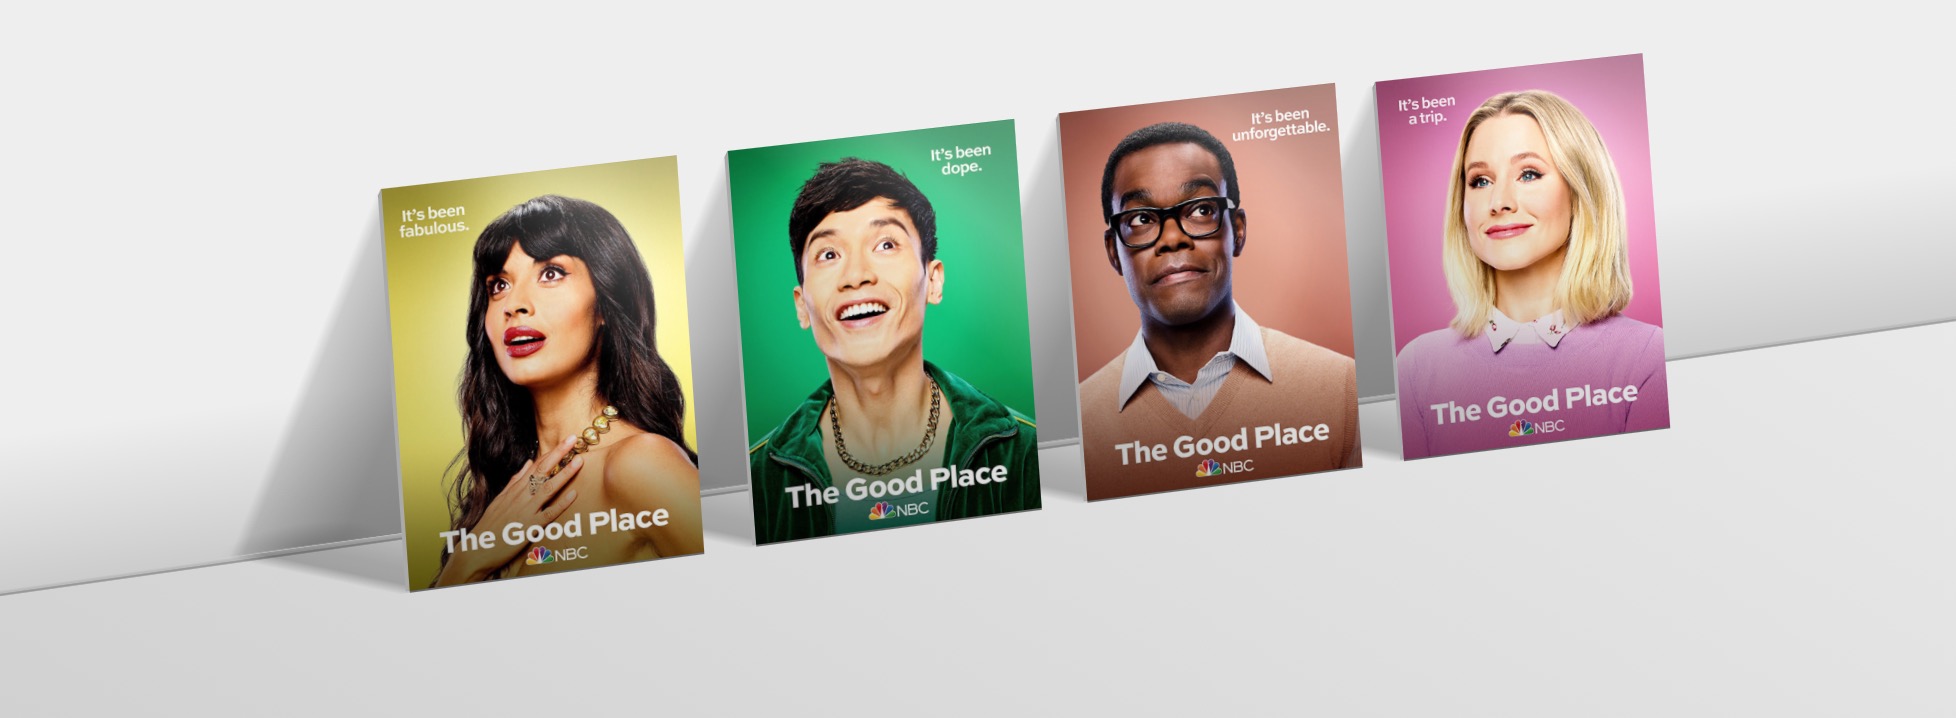 Characters from the Good Place on cards, leaning against a surface with perspective